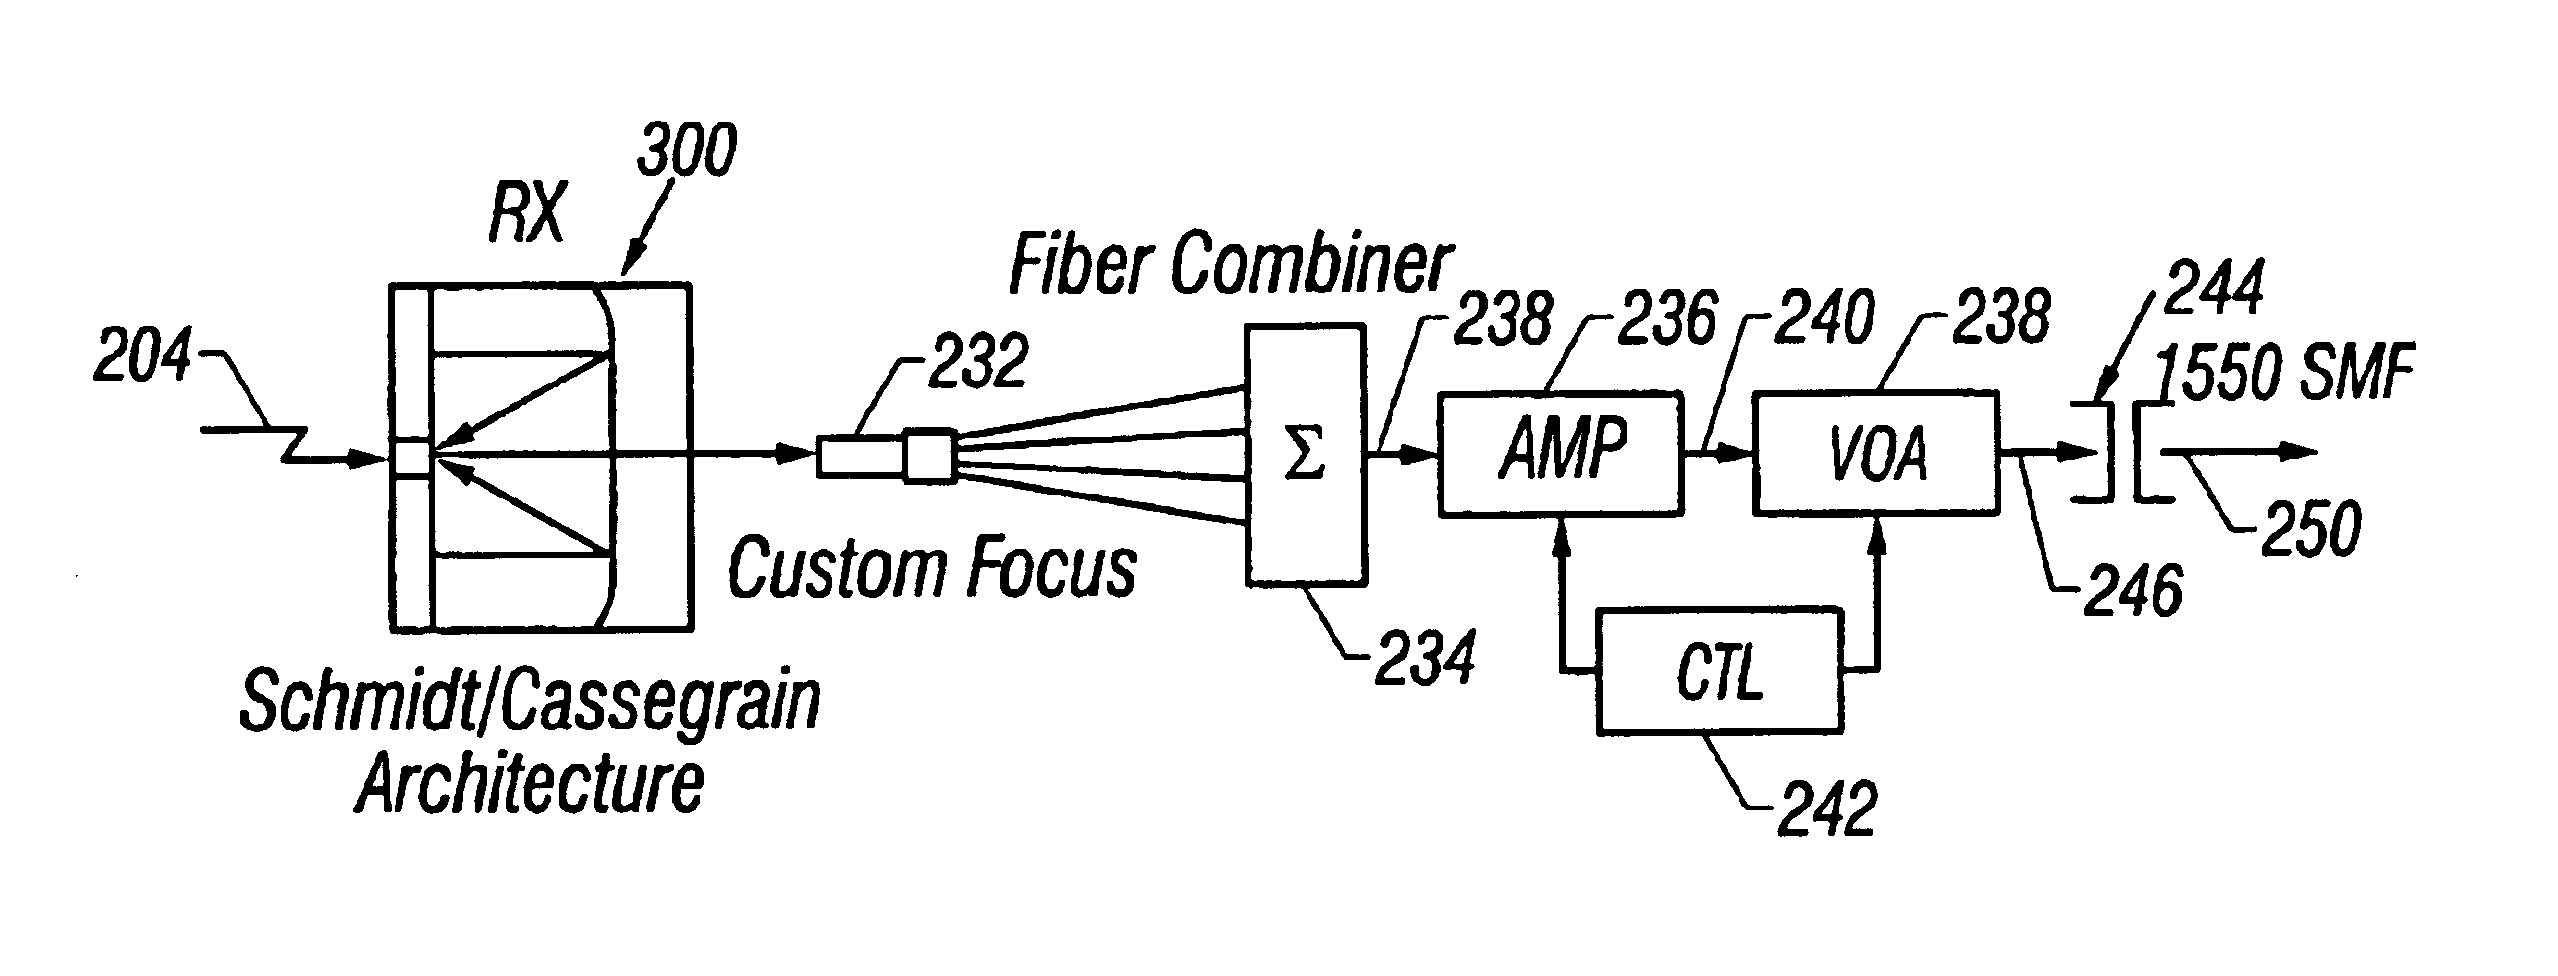 Terrestrial optical communication network of integrated fiber and free-space links which requires no electro-optical conversion between links